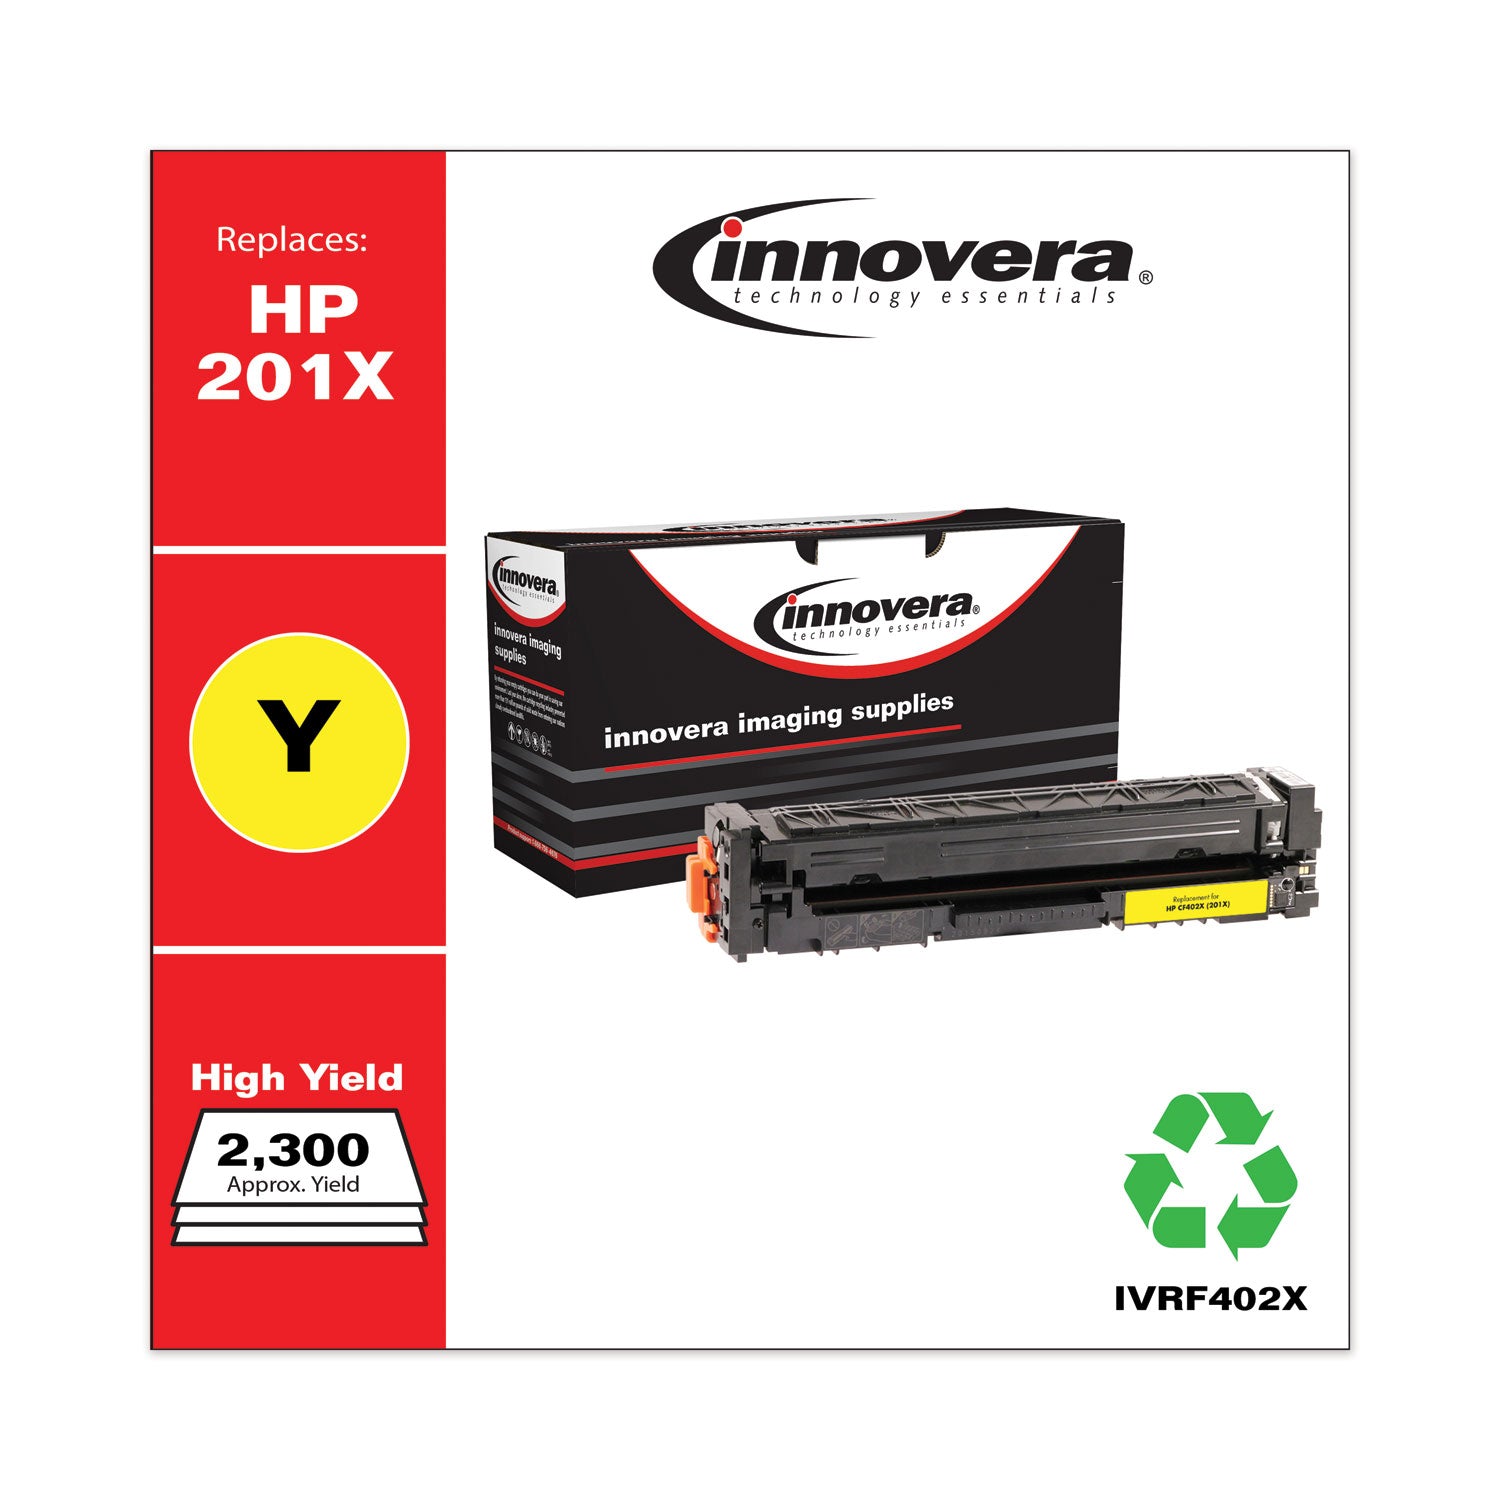 remanufactured-yellow-high-yield-toner-replacement-for-201x-cf402x-2300-page-yield-ships-in-1-3-business-days_ivrf402x - 2